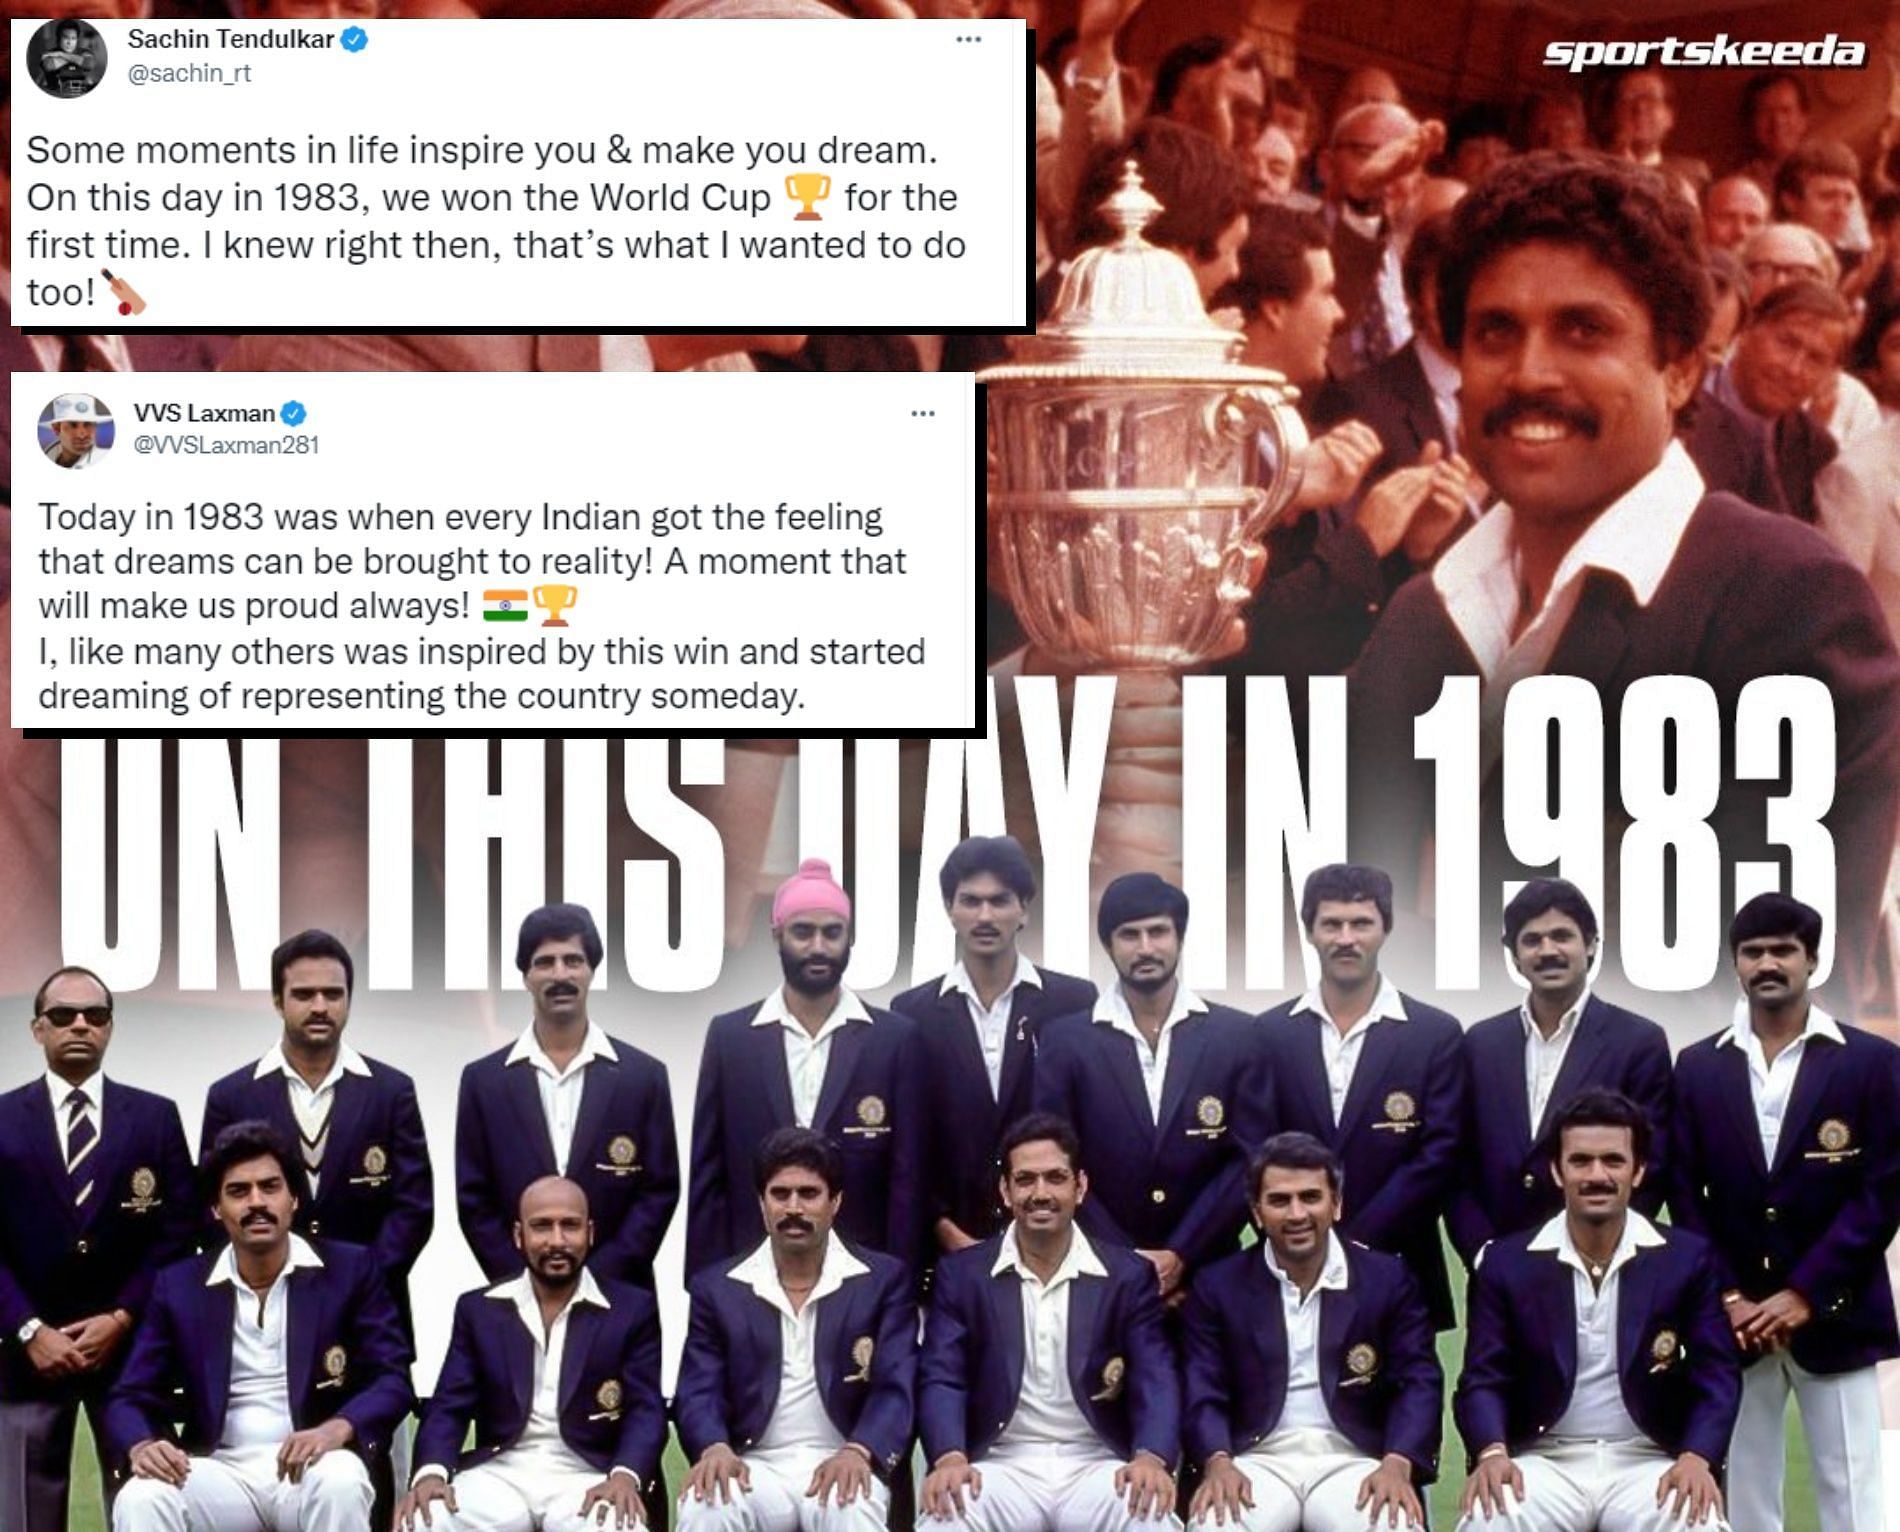 India won the World Cup on this day 39 years ago.